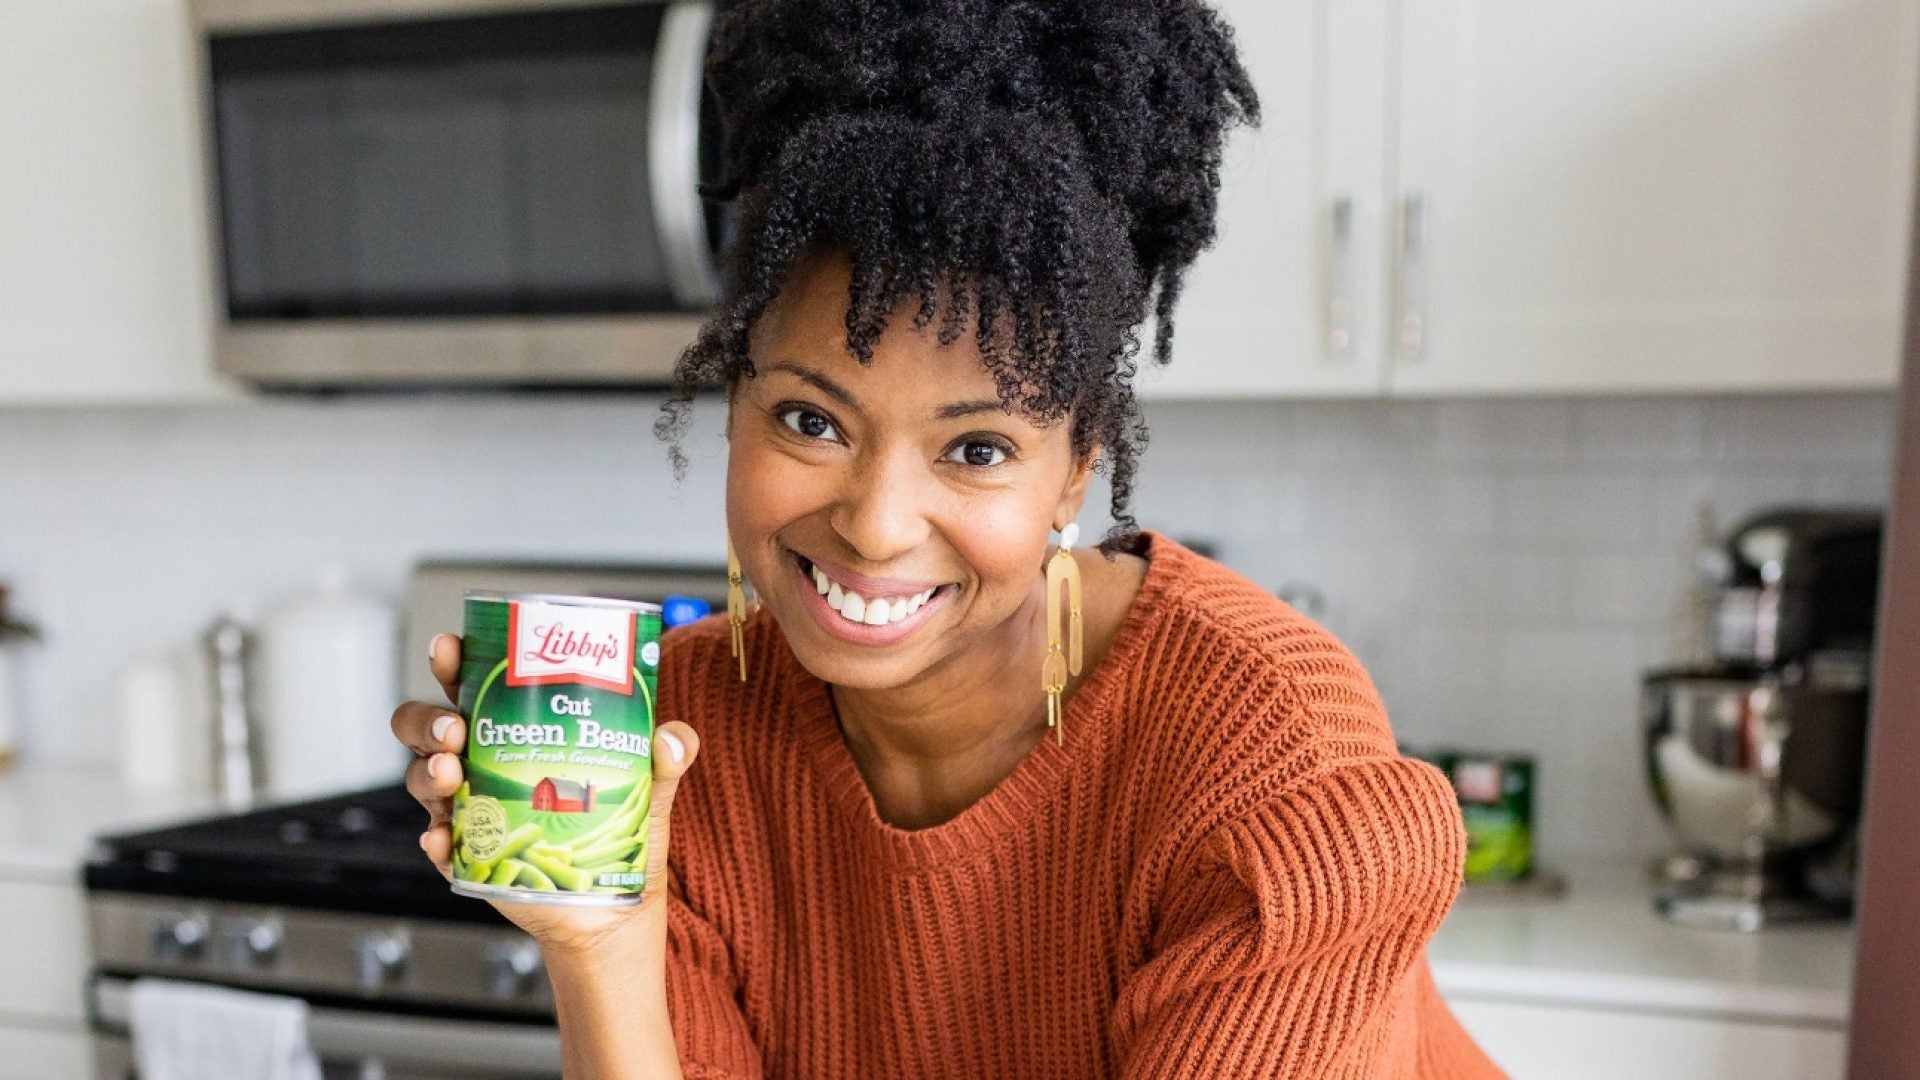 Jocelyn Delk Adams Shares Ways To Revamp Your Veggies For Thanksgiving (And Possibly Make Money While Doing So)